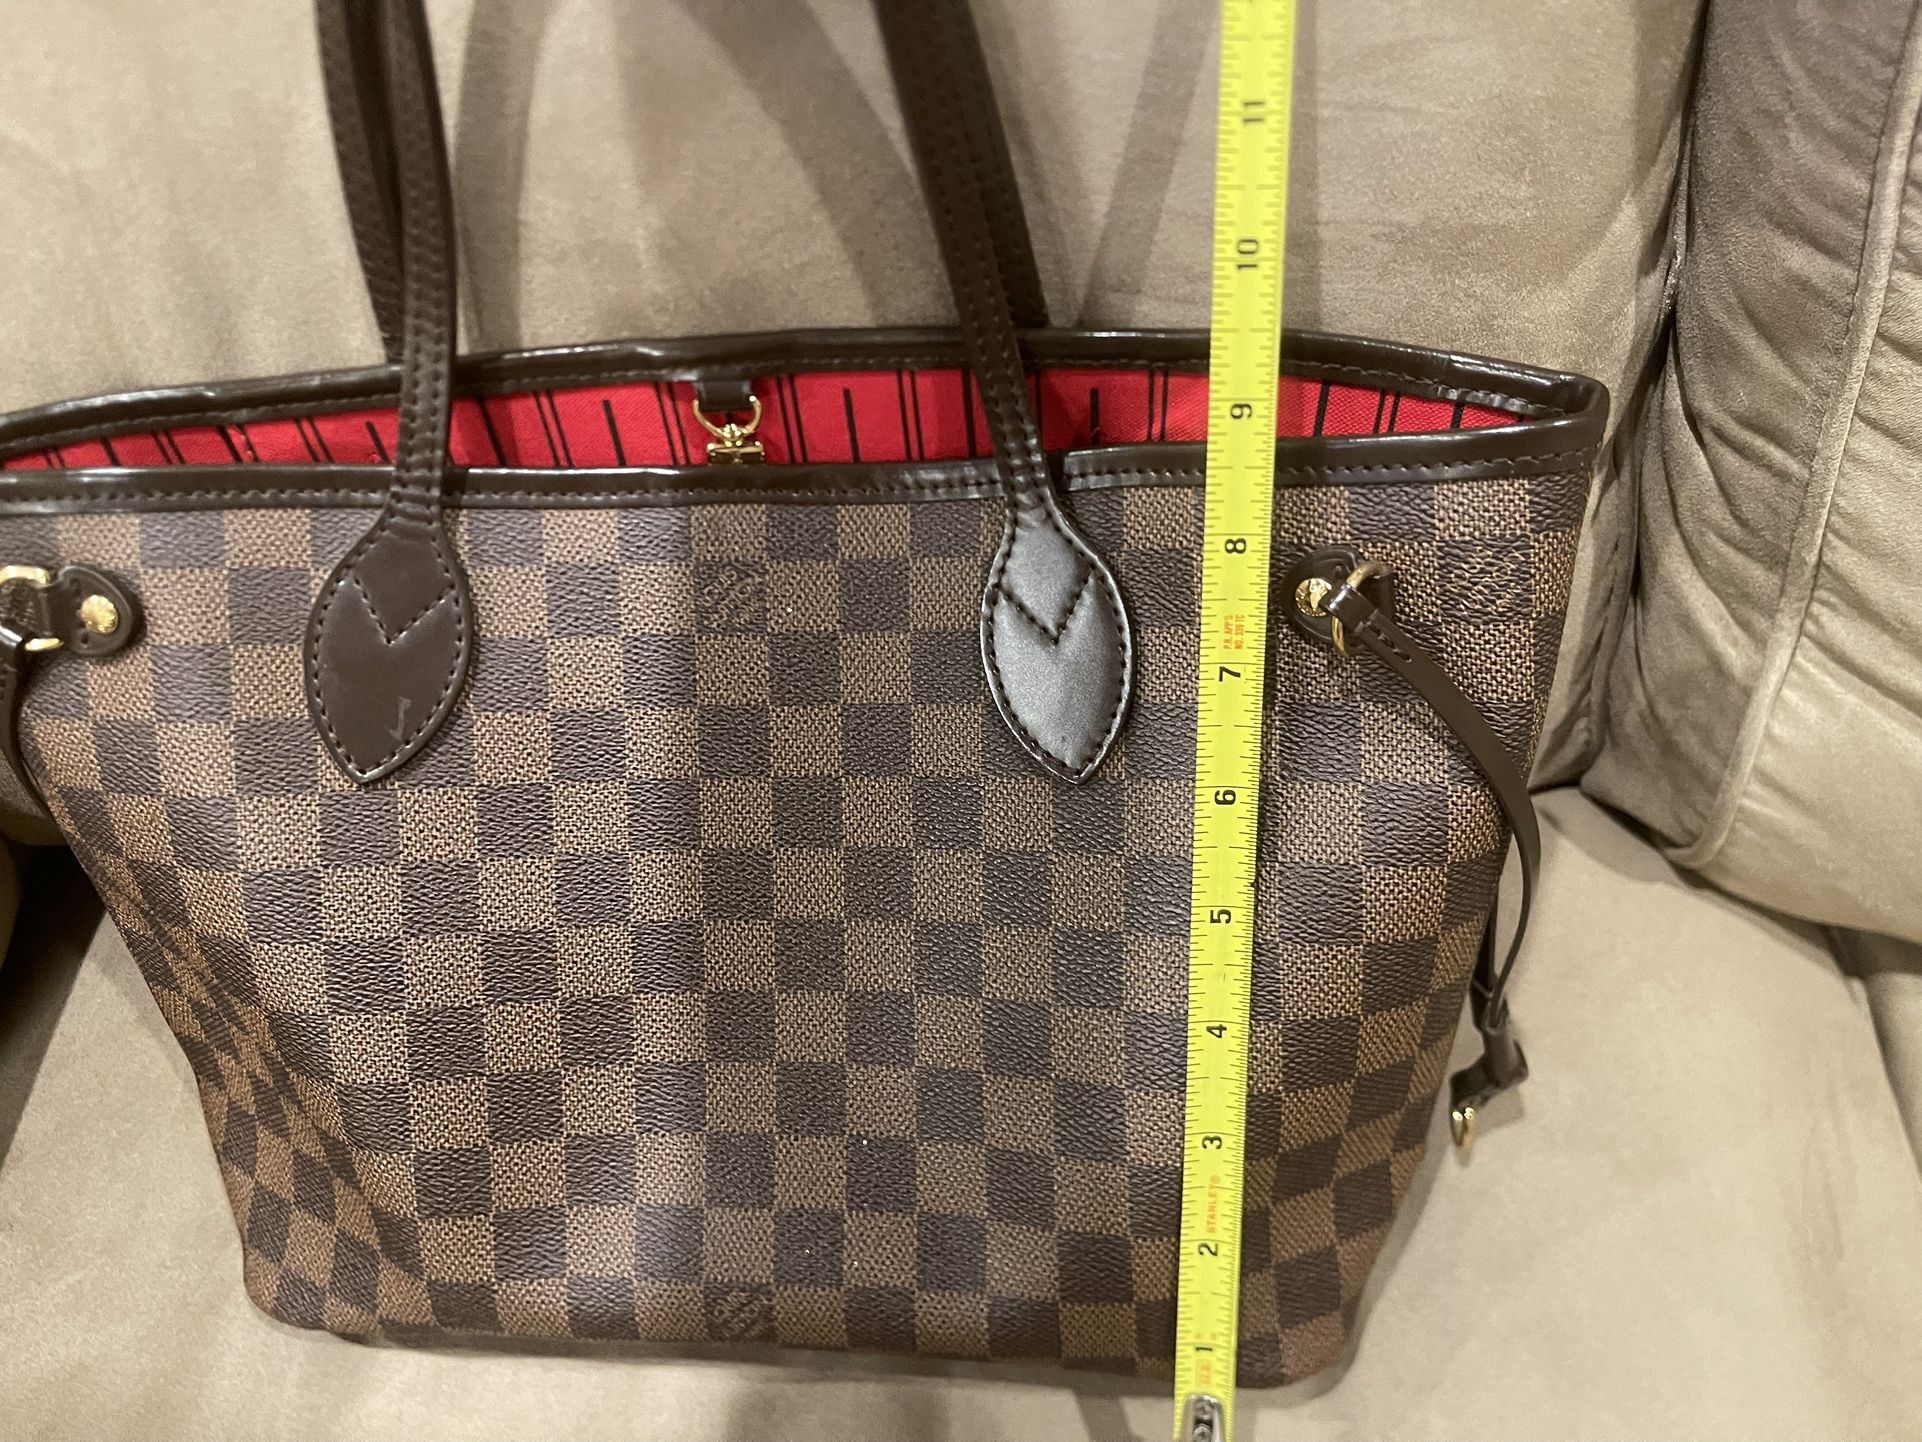 100% Original Louis Vuitton 101 Champs Elysees Bag Louis Vuitton Tote Bag  Louis Vuitton ToteBag made in france, Women's Fashion, Bags & Wallets, Tote  Bags on Carousell